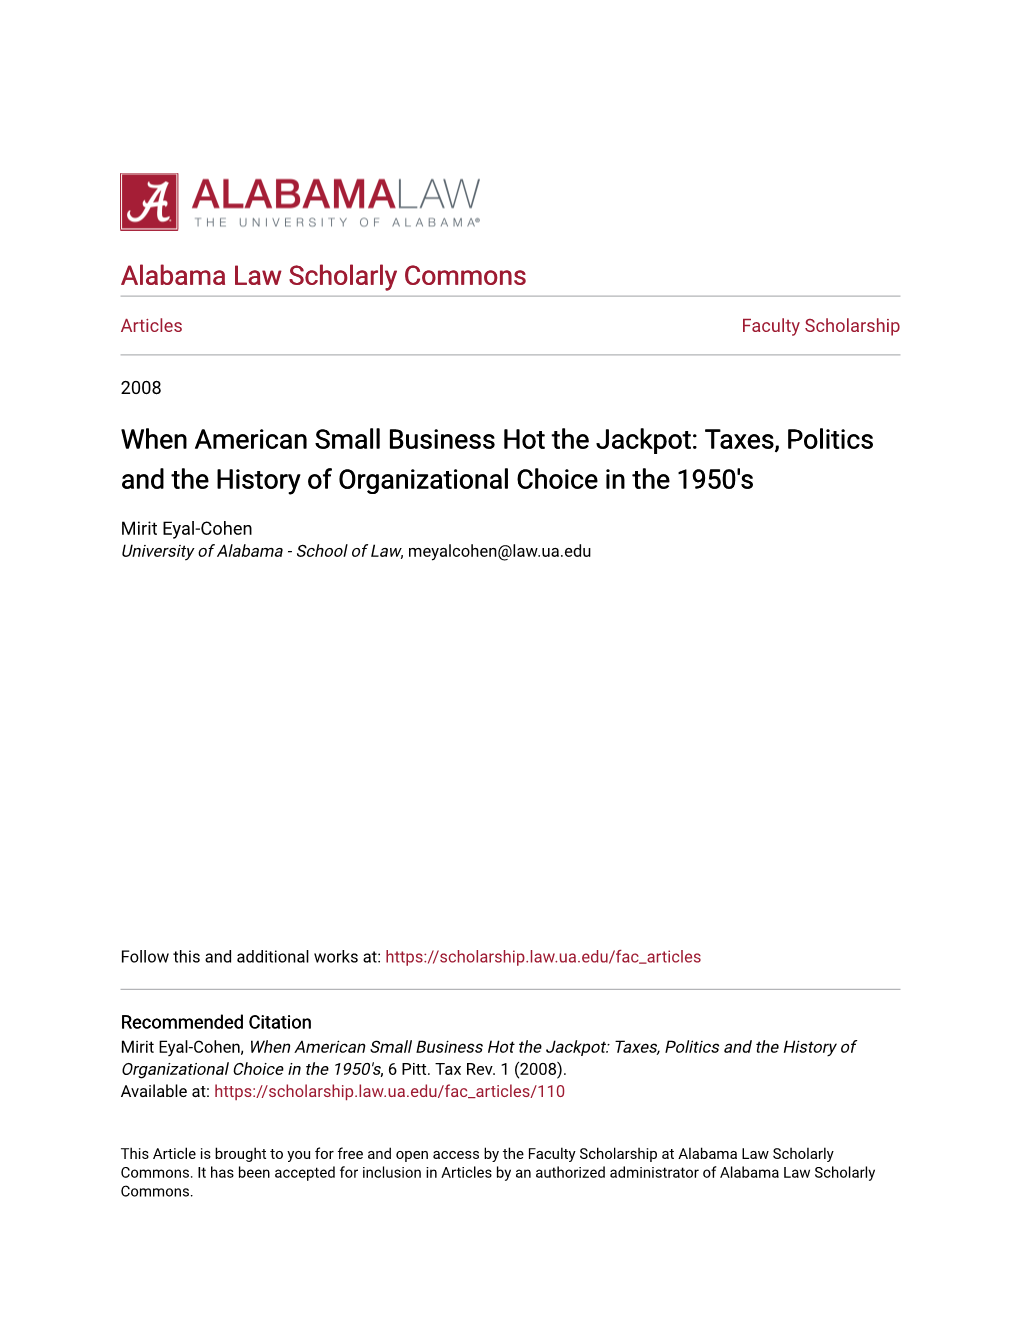 Taxes, Politics and the History of Organizational Choice in the 1950'S